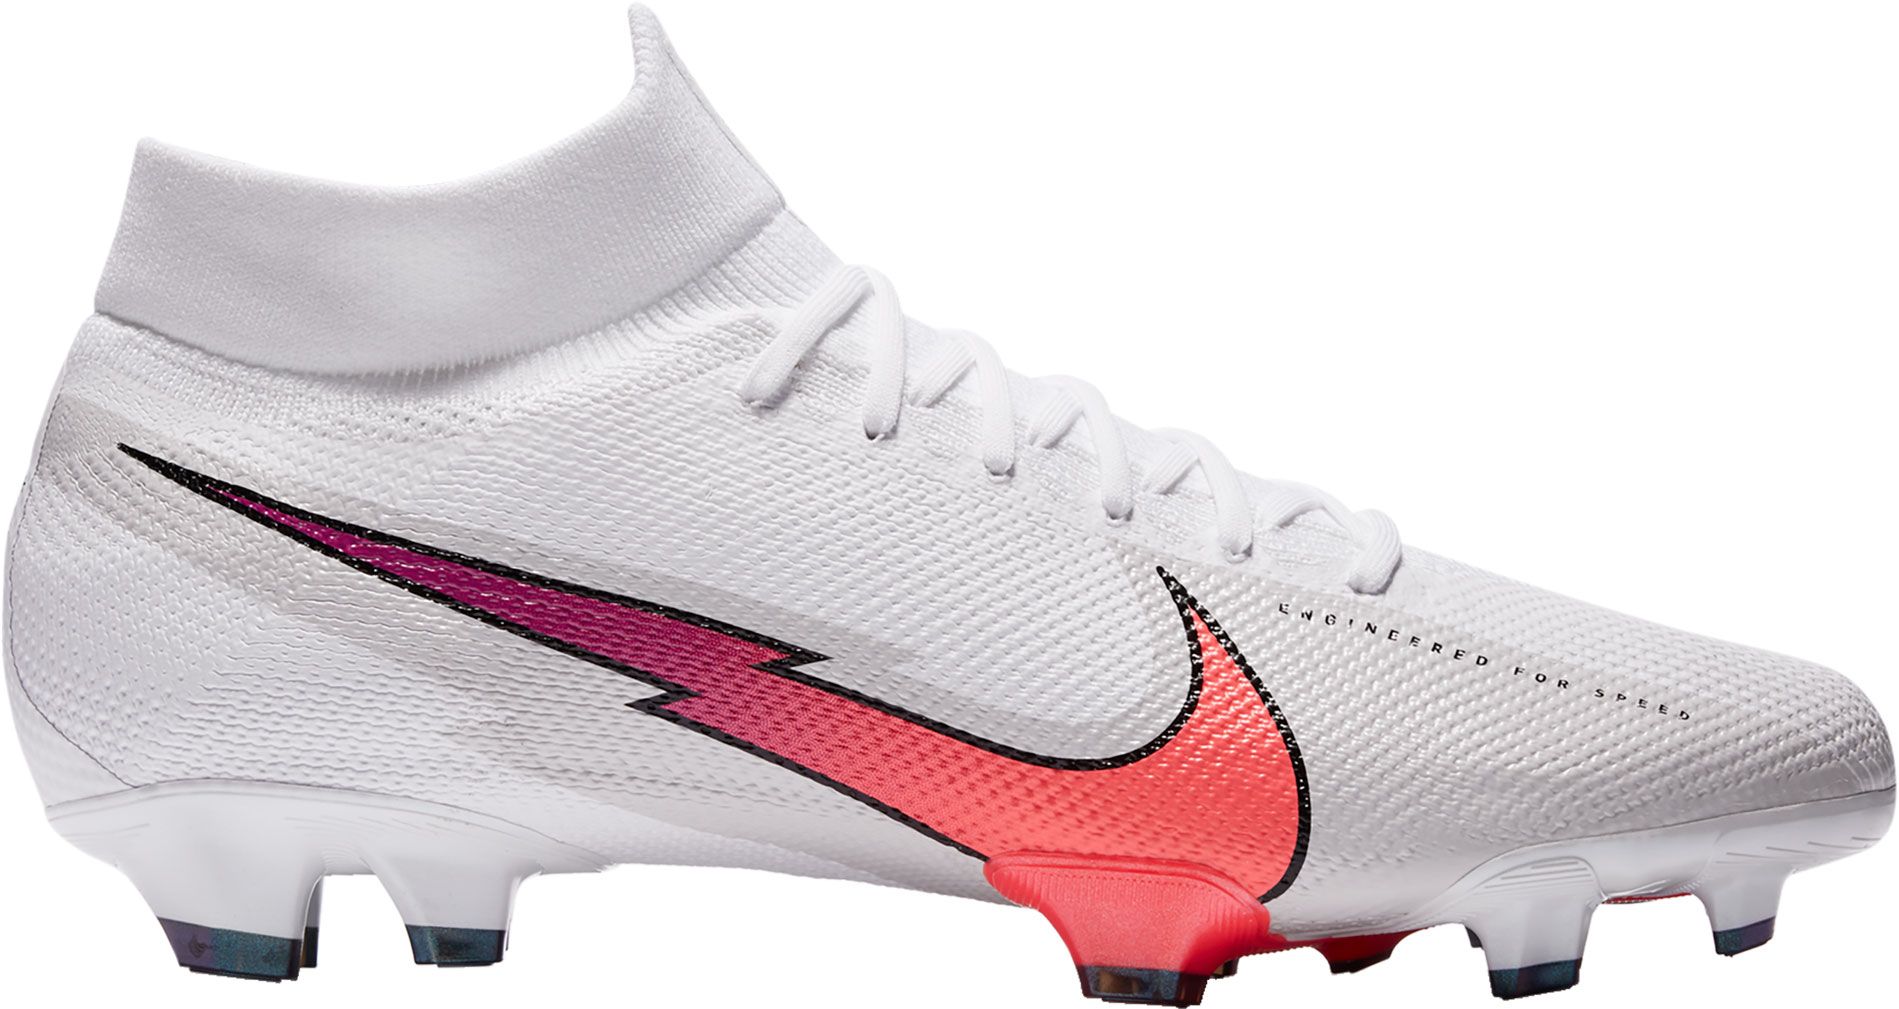 nike mercurial superfly 7 soccer cleats